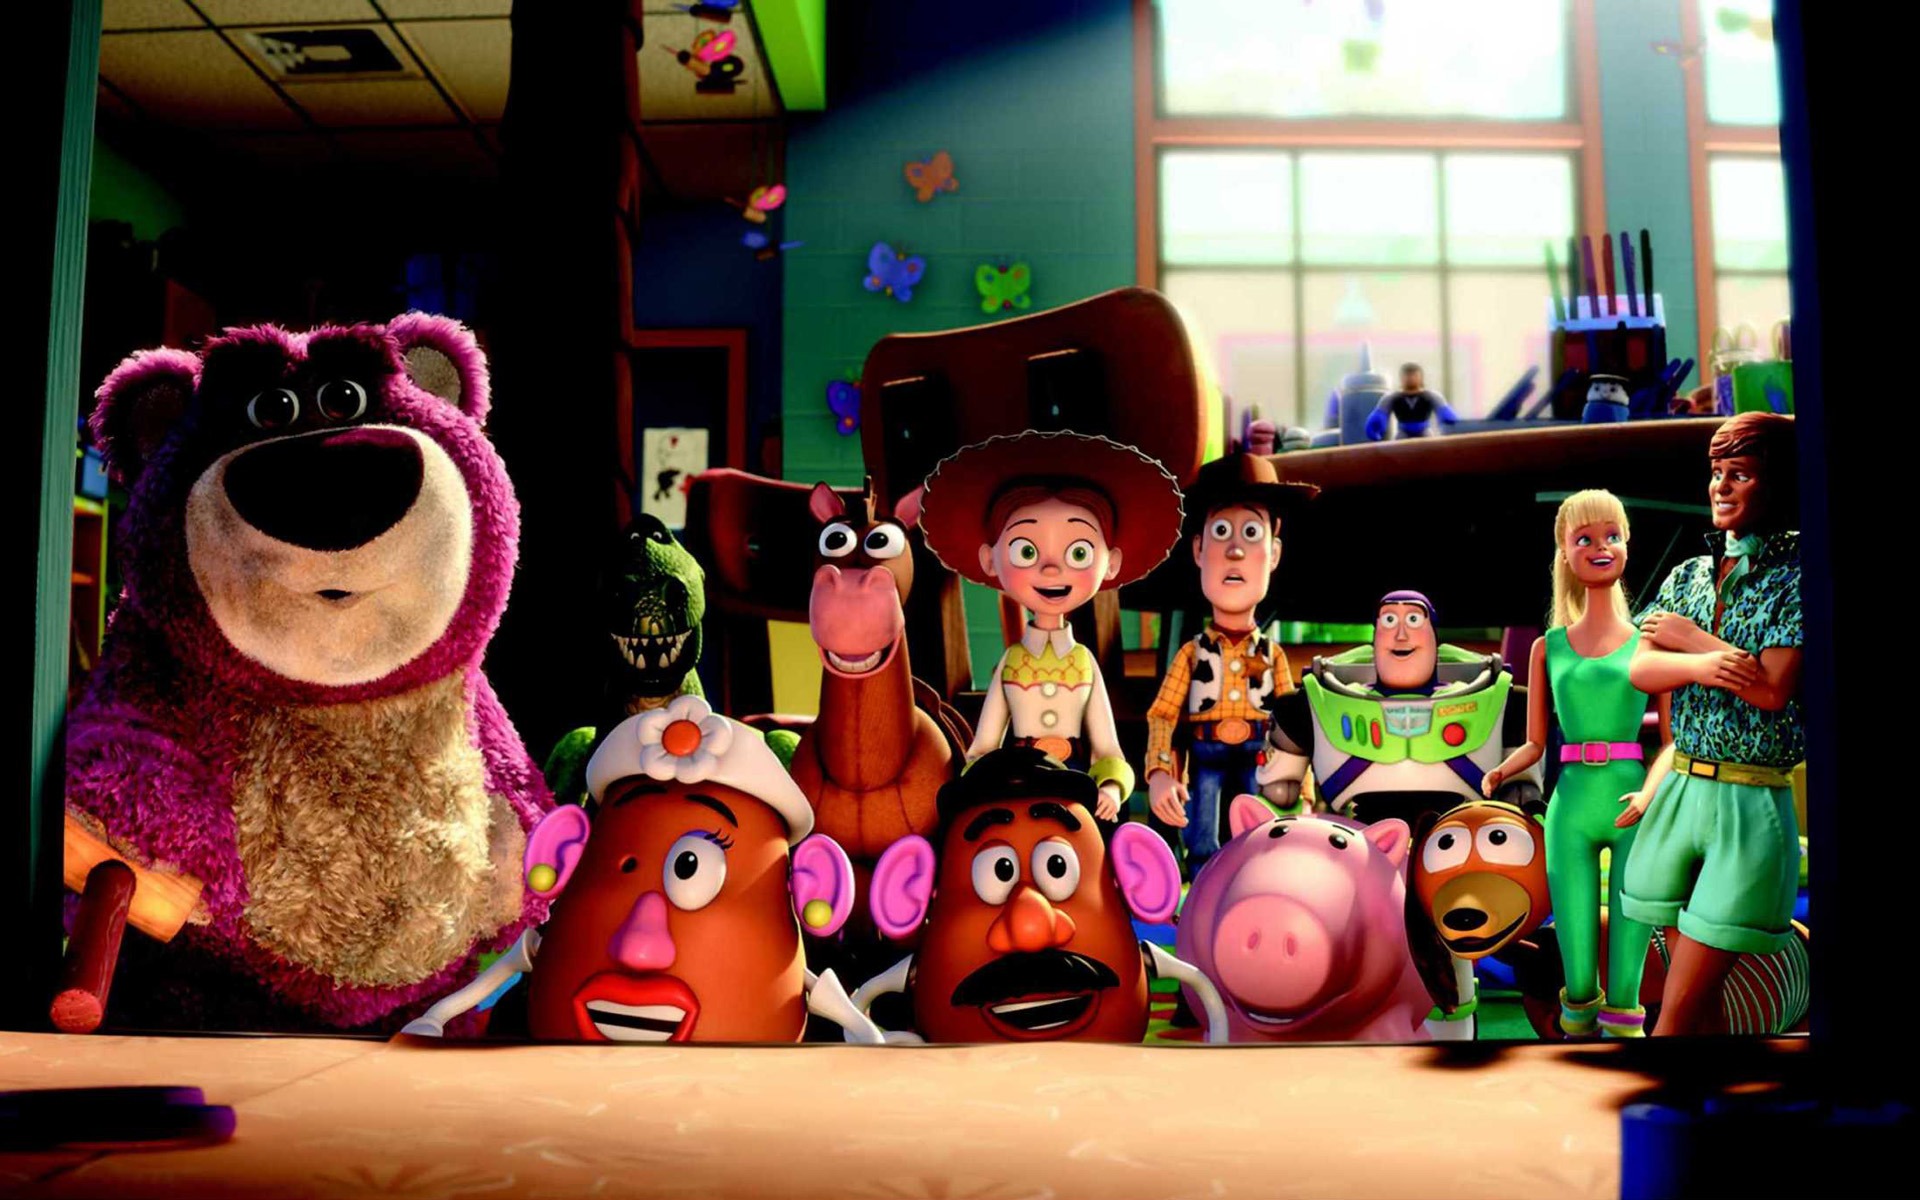 Toy Story 3 HD wallpaper #28 - 1920x1200 Wallpaper Download - Toy ...